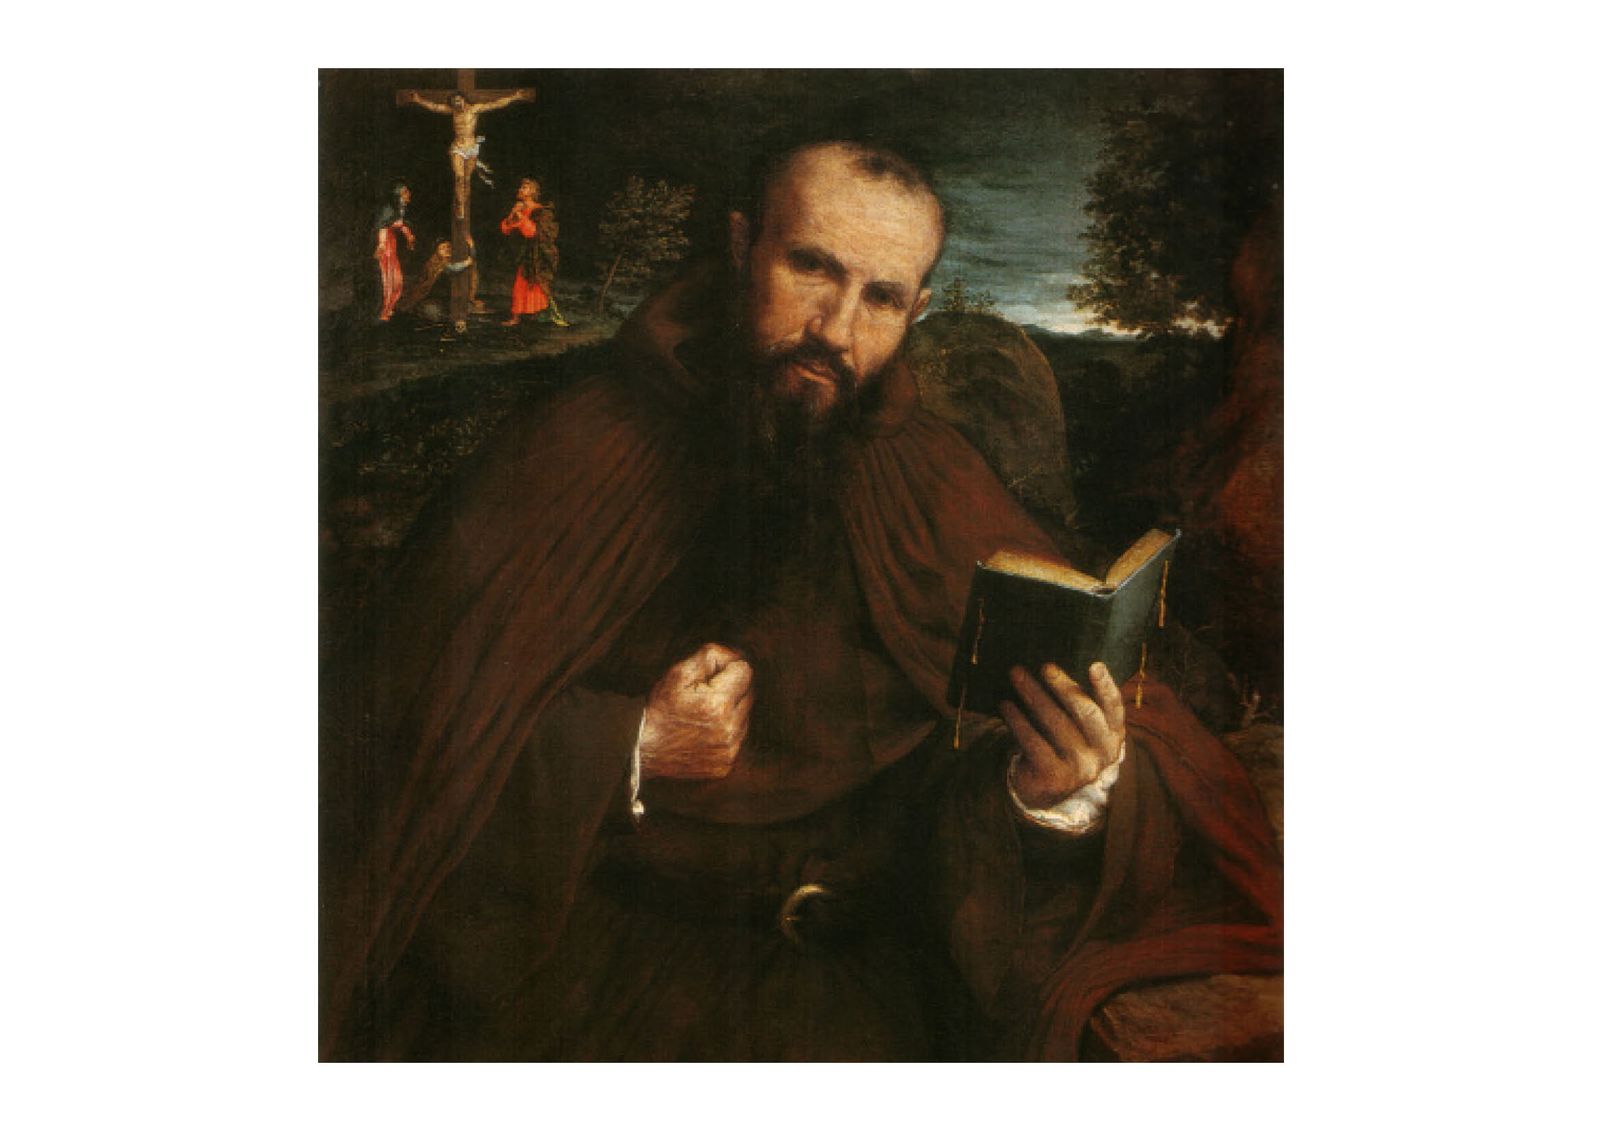 © Francesca Seravalle - The fist as penitential act. Brother Gregorio Belo of Vicenza by Lorenzo Lotto, 1547. Public Domain